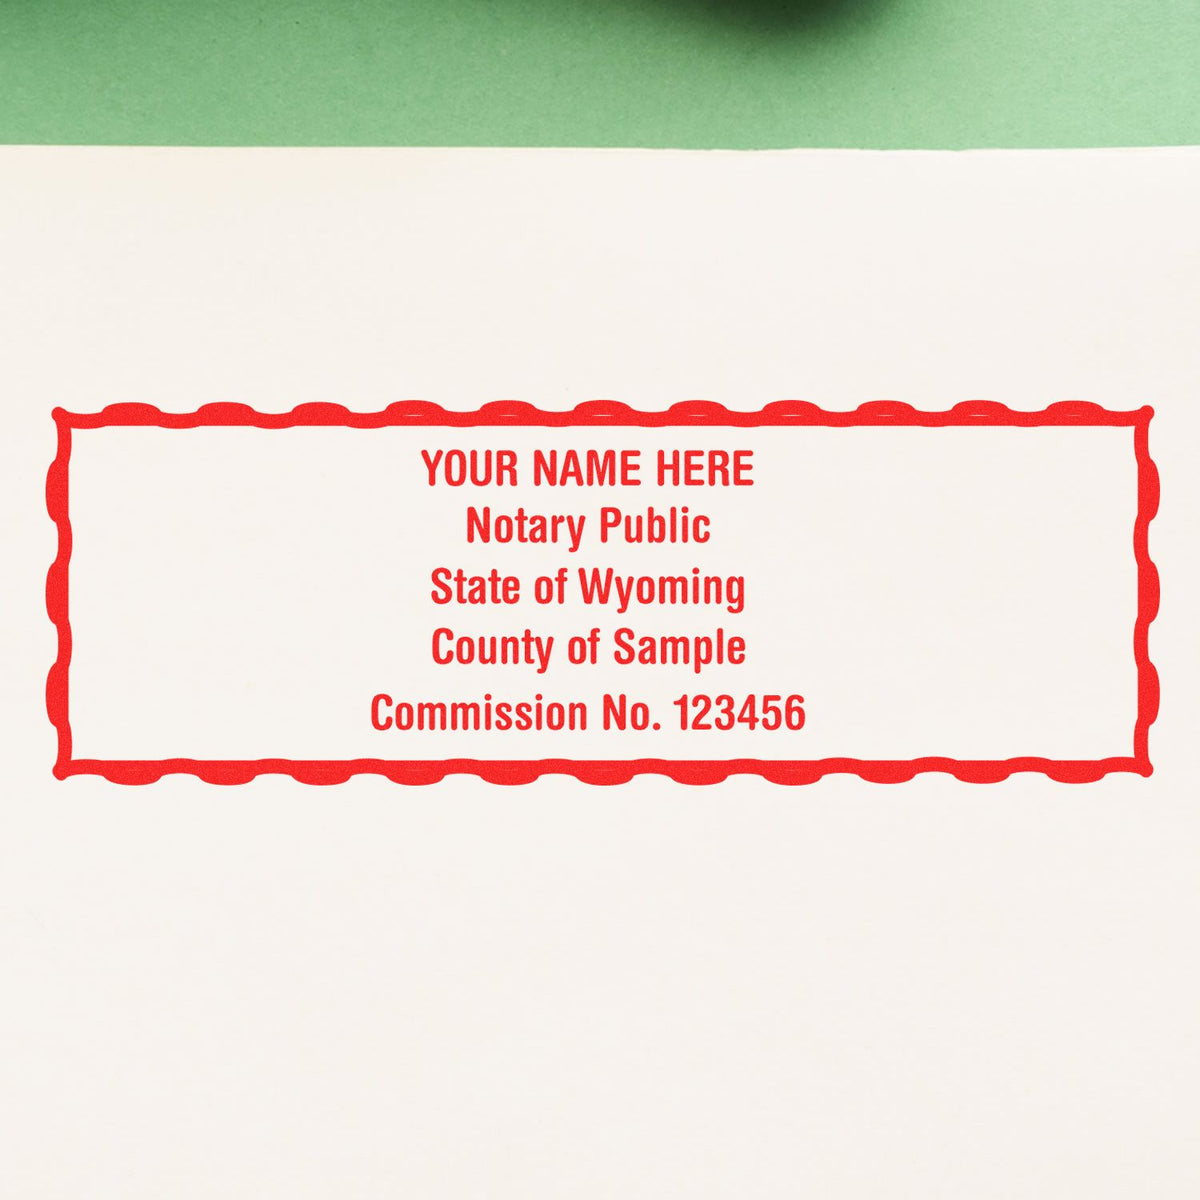 An alternative view of the Slim Pre-Inked Rectangular Notary Stamp for Wyoming stamped on a sheet of paper showing the image in use